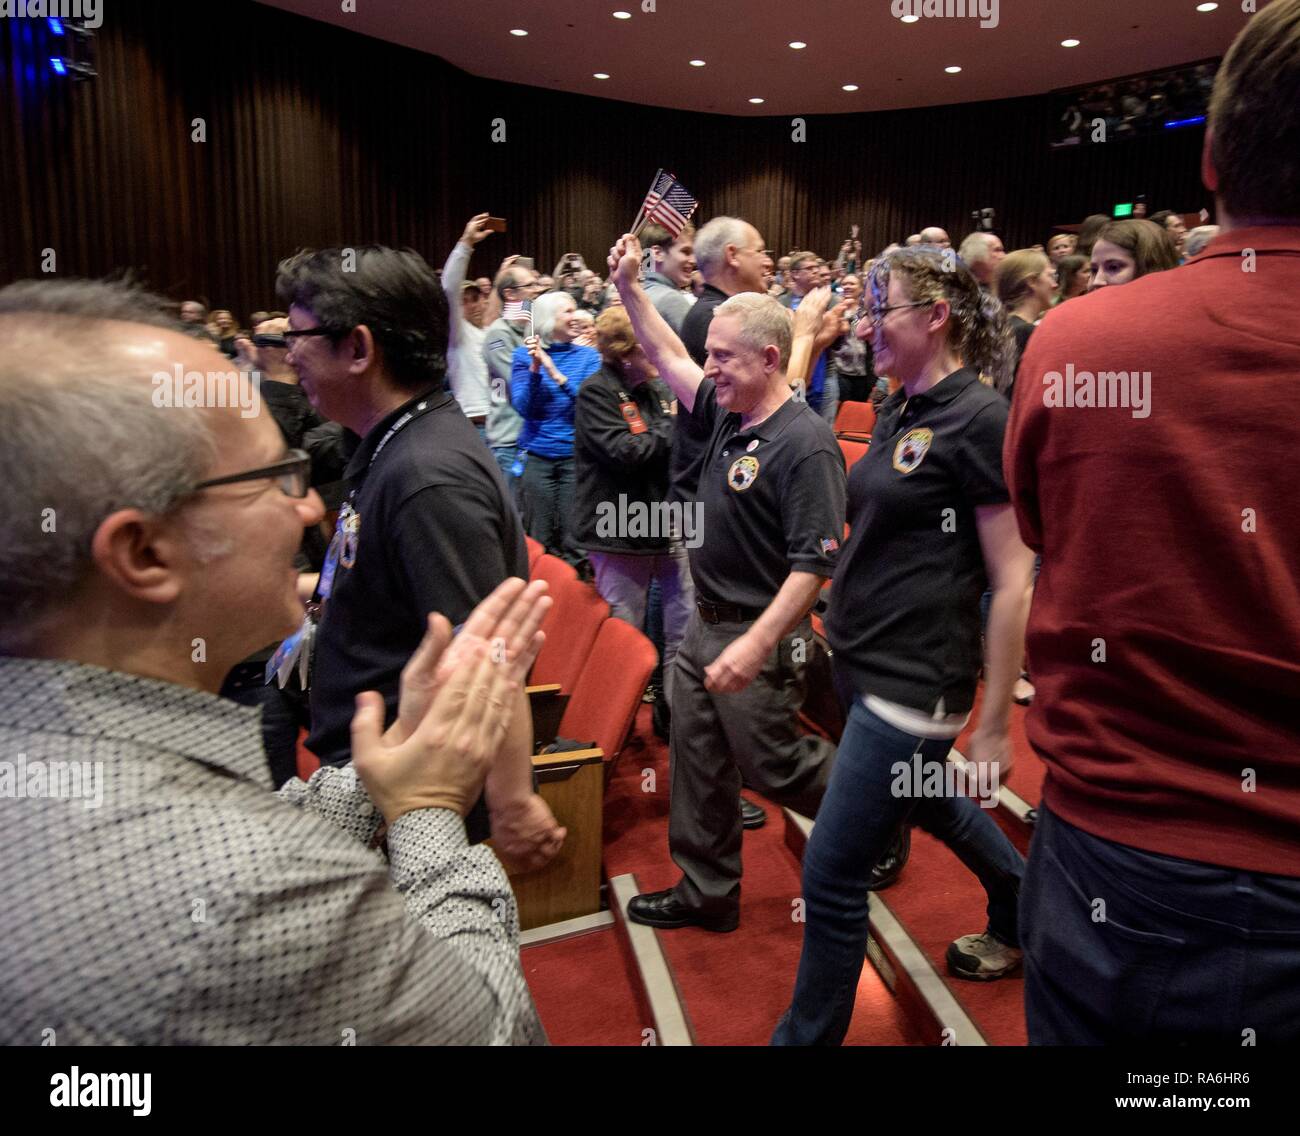 New Horizons principal investigator Alan Stern, center, of the Southwest Research Institute, along with other mission team members, wave American flags as they arrive for a press conference following the successful flyby of Ultima Thule at Johns Hopkins University Applied Physics Laboratory January 1, 2019 in Laurel, Maryland. Stock Photo